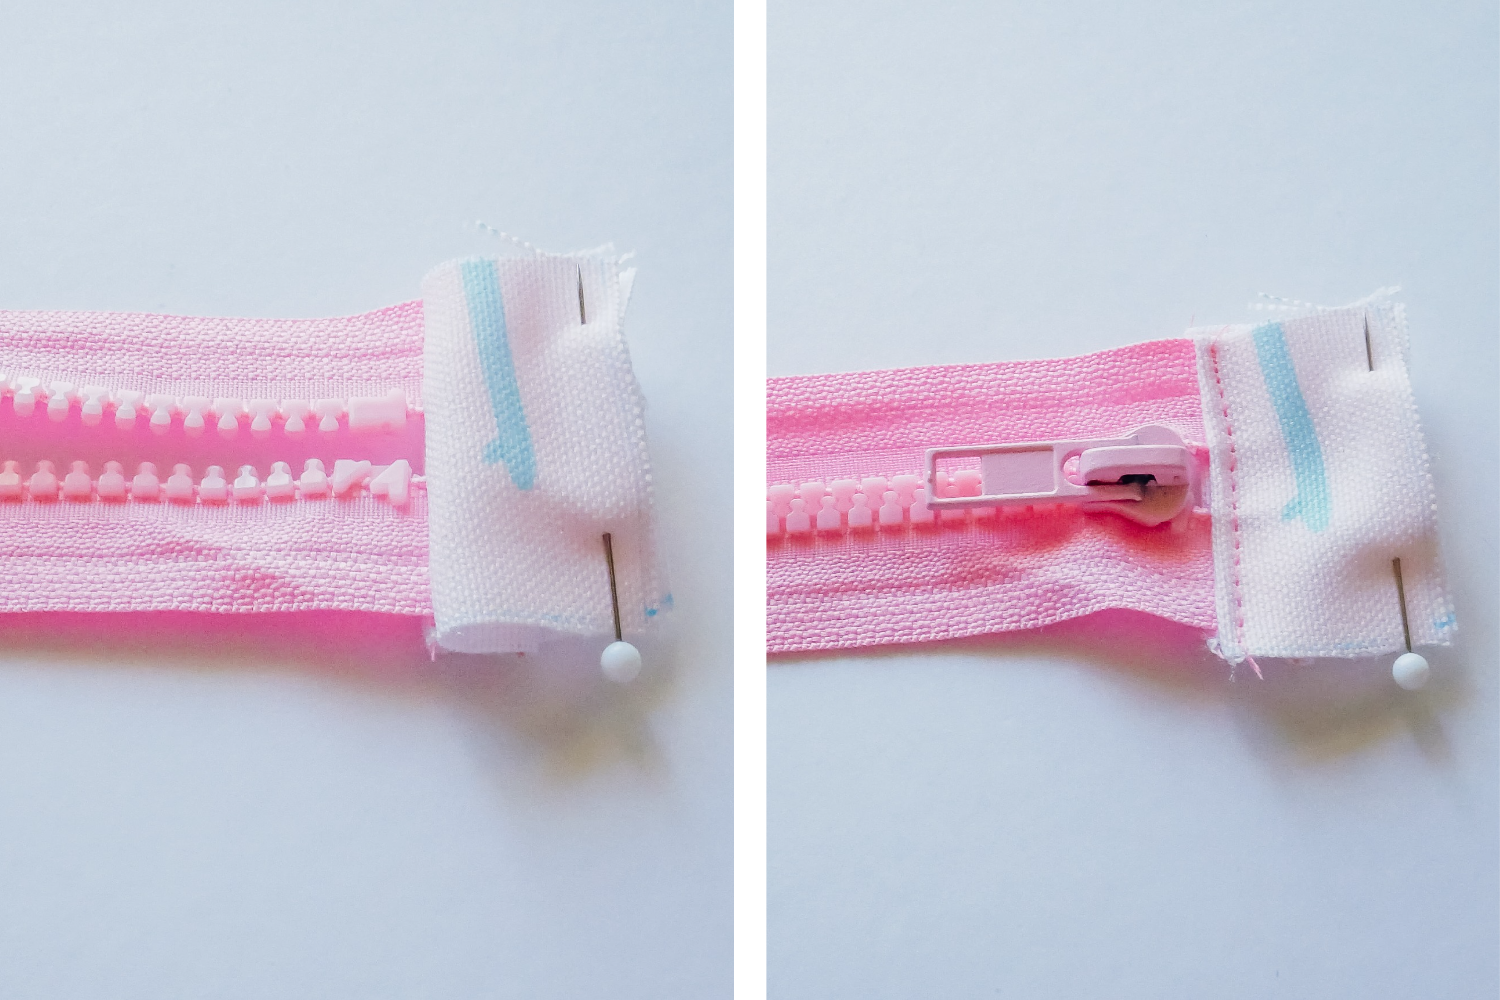 Two images have been placed side by side in one rectangle. On the left, a pink zipper is lying on a white surface. A small piece of fabric has been folded back over the right edge of the zipper and pinned to the edge of the zipper The design on the fabric features small female surfers surfing through a pink background. On the right, a pink zipper is lying on a white surface. A small piece of fabric has been sewn to the right of the zipper in pink thread. The fabric features a design with small female surfers surfing through a pink background.